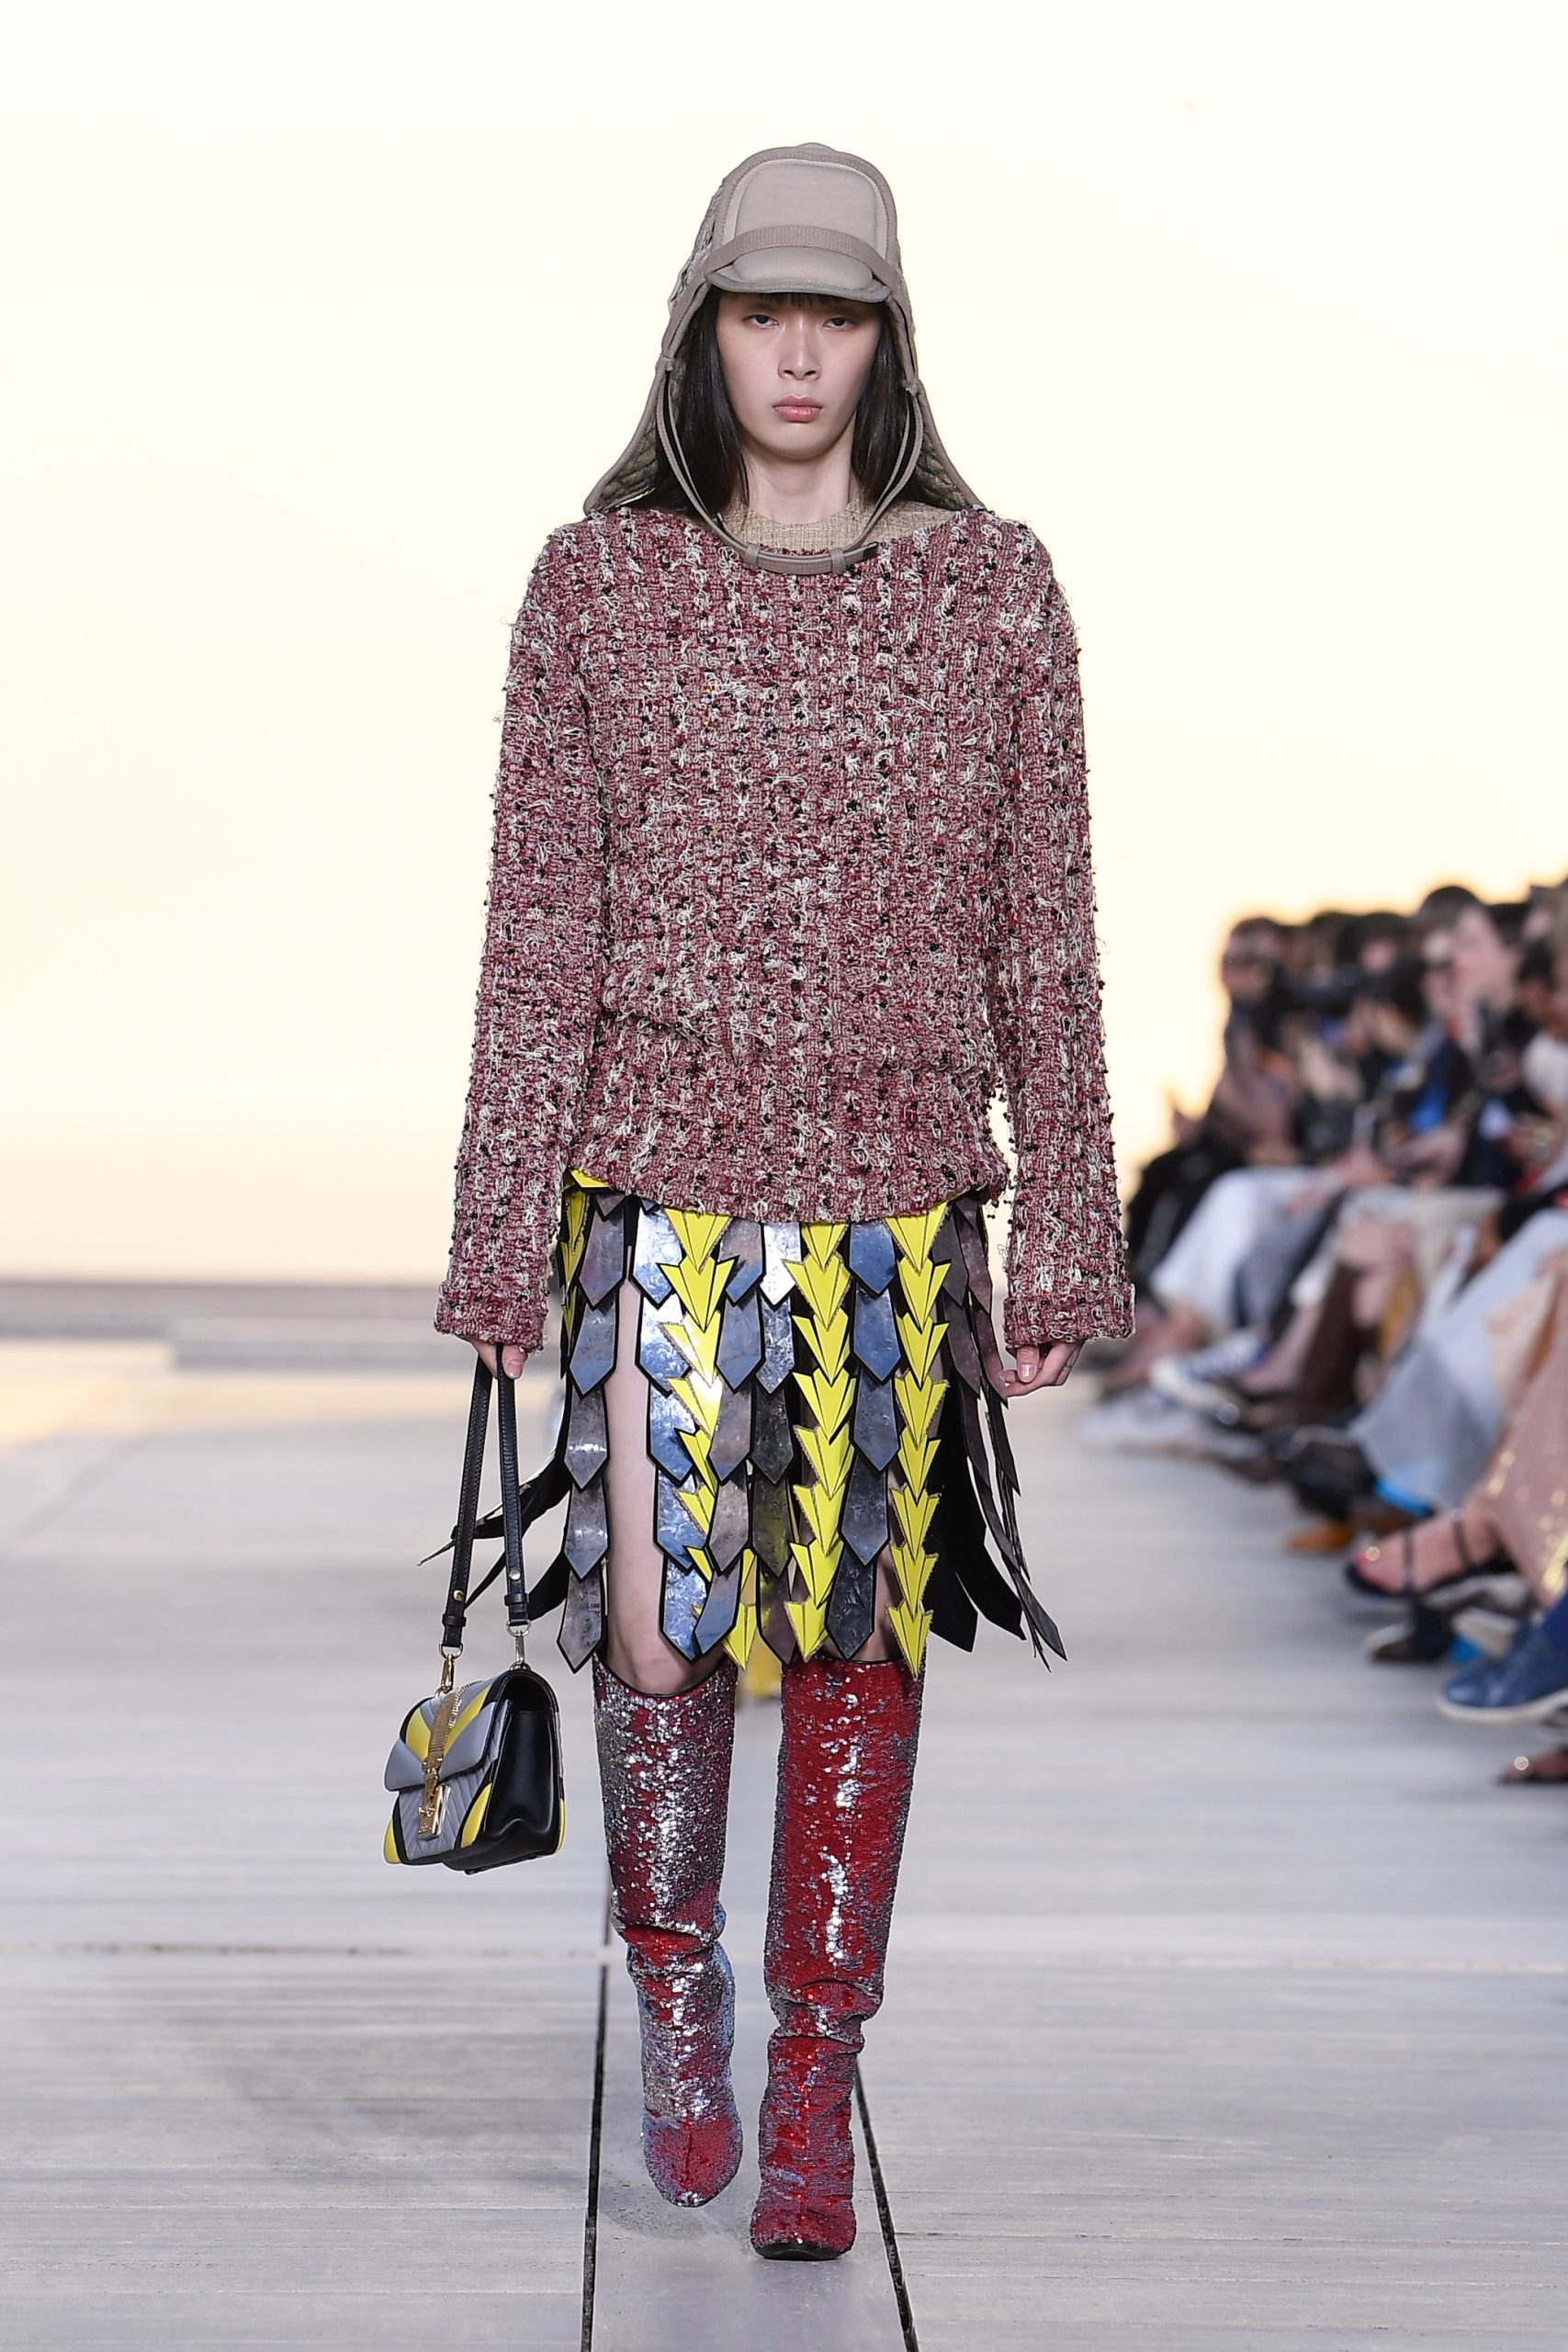 Louis Vuitton 2023 Cruise Show, Louis Vuitton Presents a Resort Collection  Inspired by the Sun